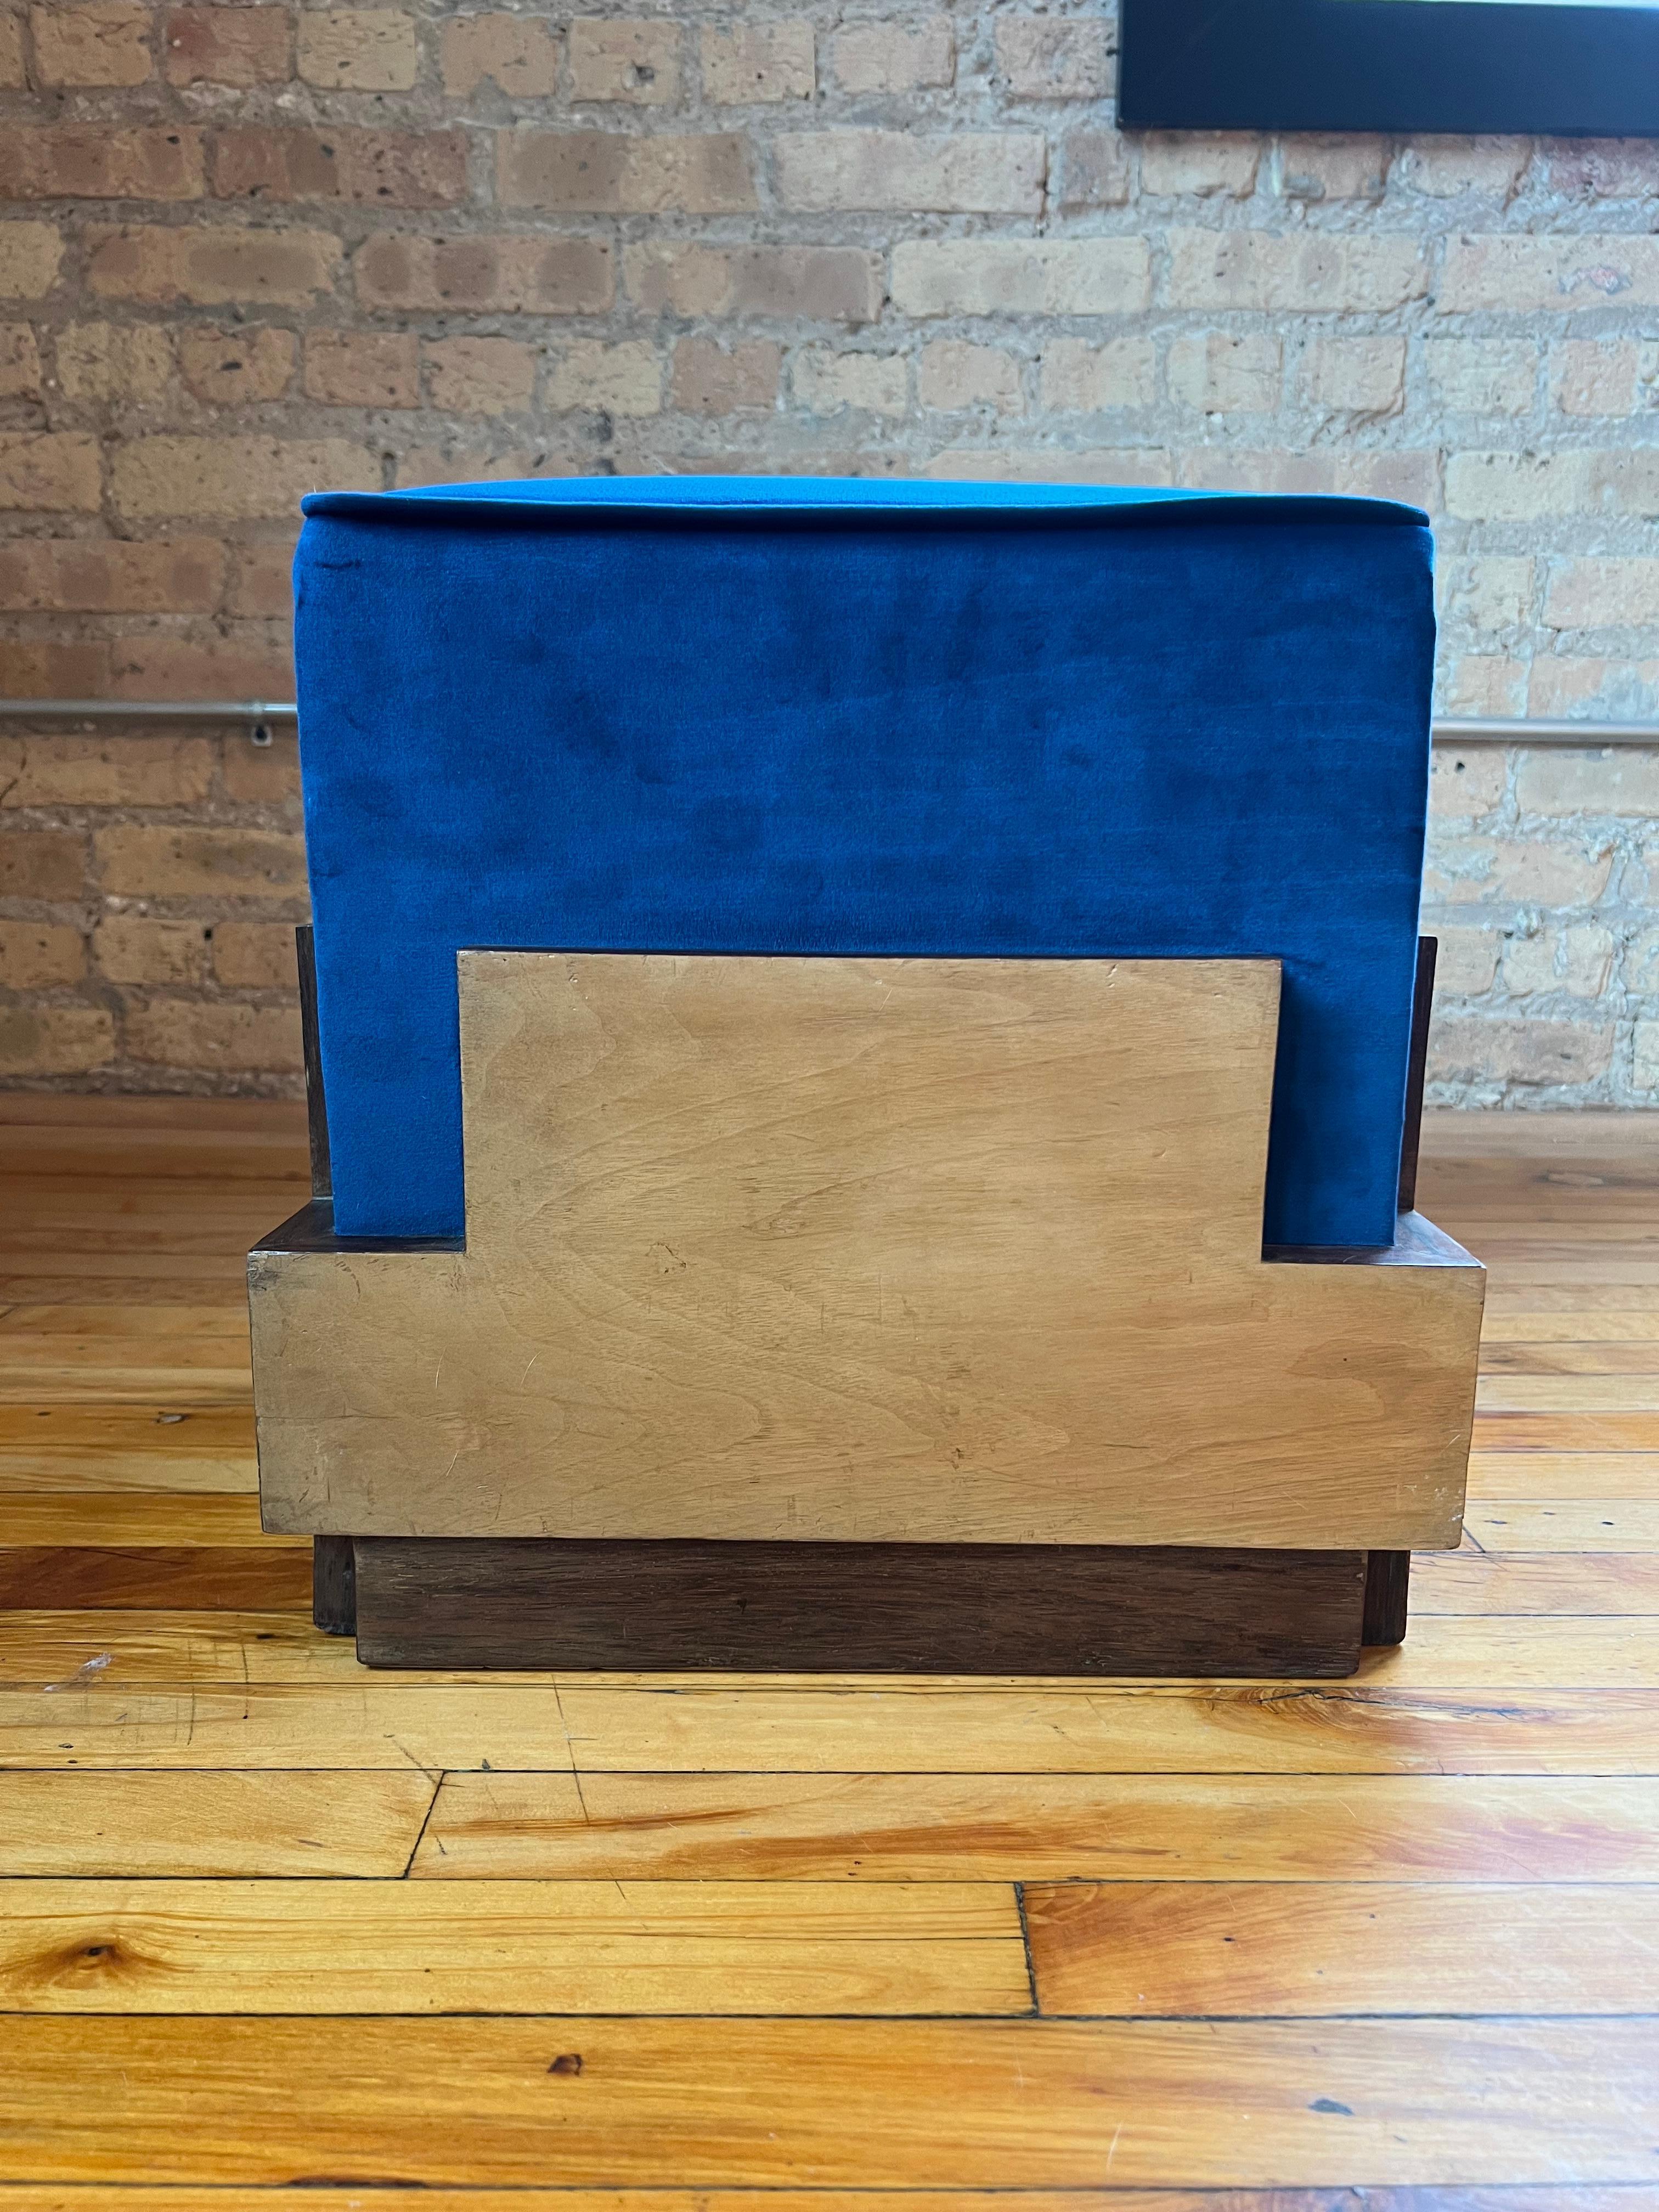 Italian Art Deco Blue Velvet Maple and walnut ottomans. Consists of walnut wood and maple wood, recently upholstered with blue velvet fabric.
39x39x39 cm or 14x14x14 inches.

Very good condition. Stripes, slight signs of wear, recently replaced